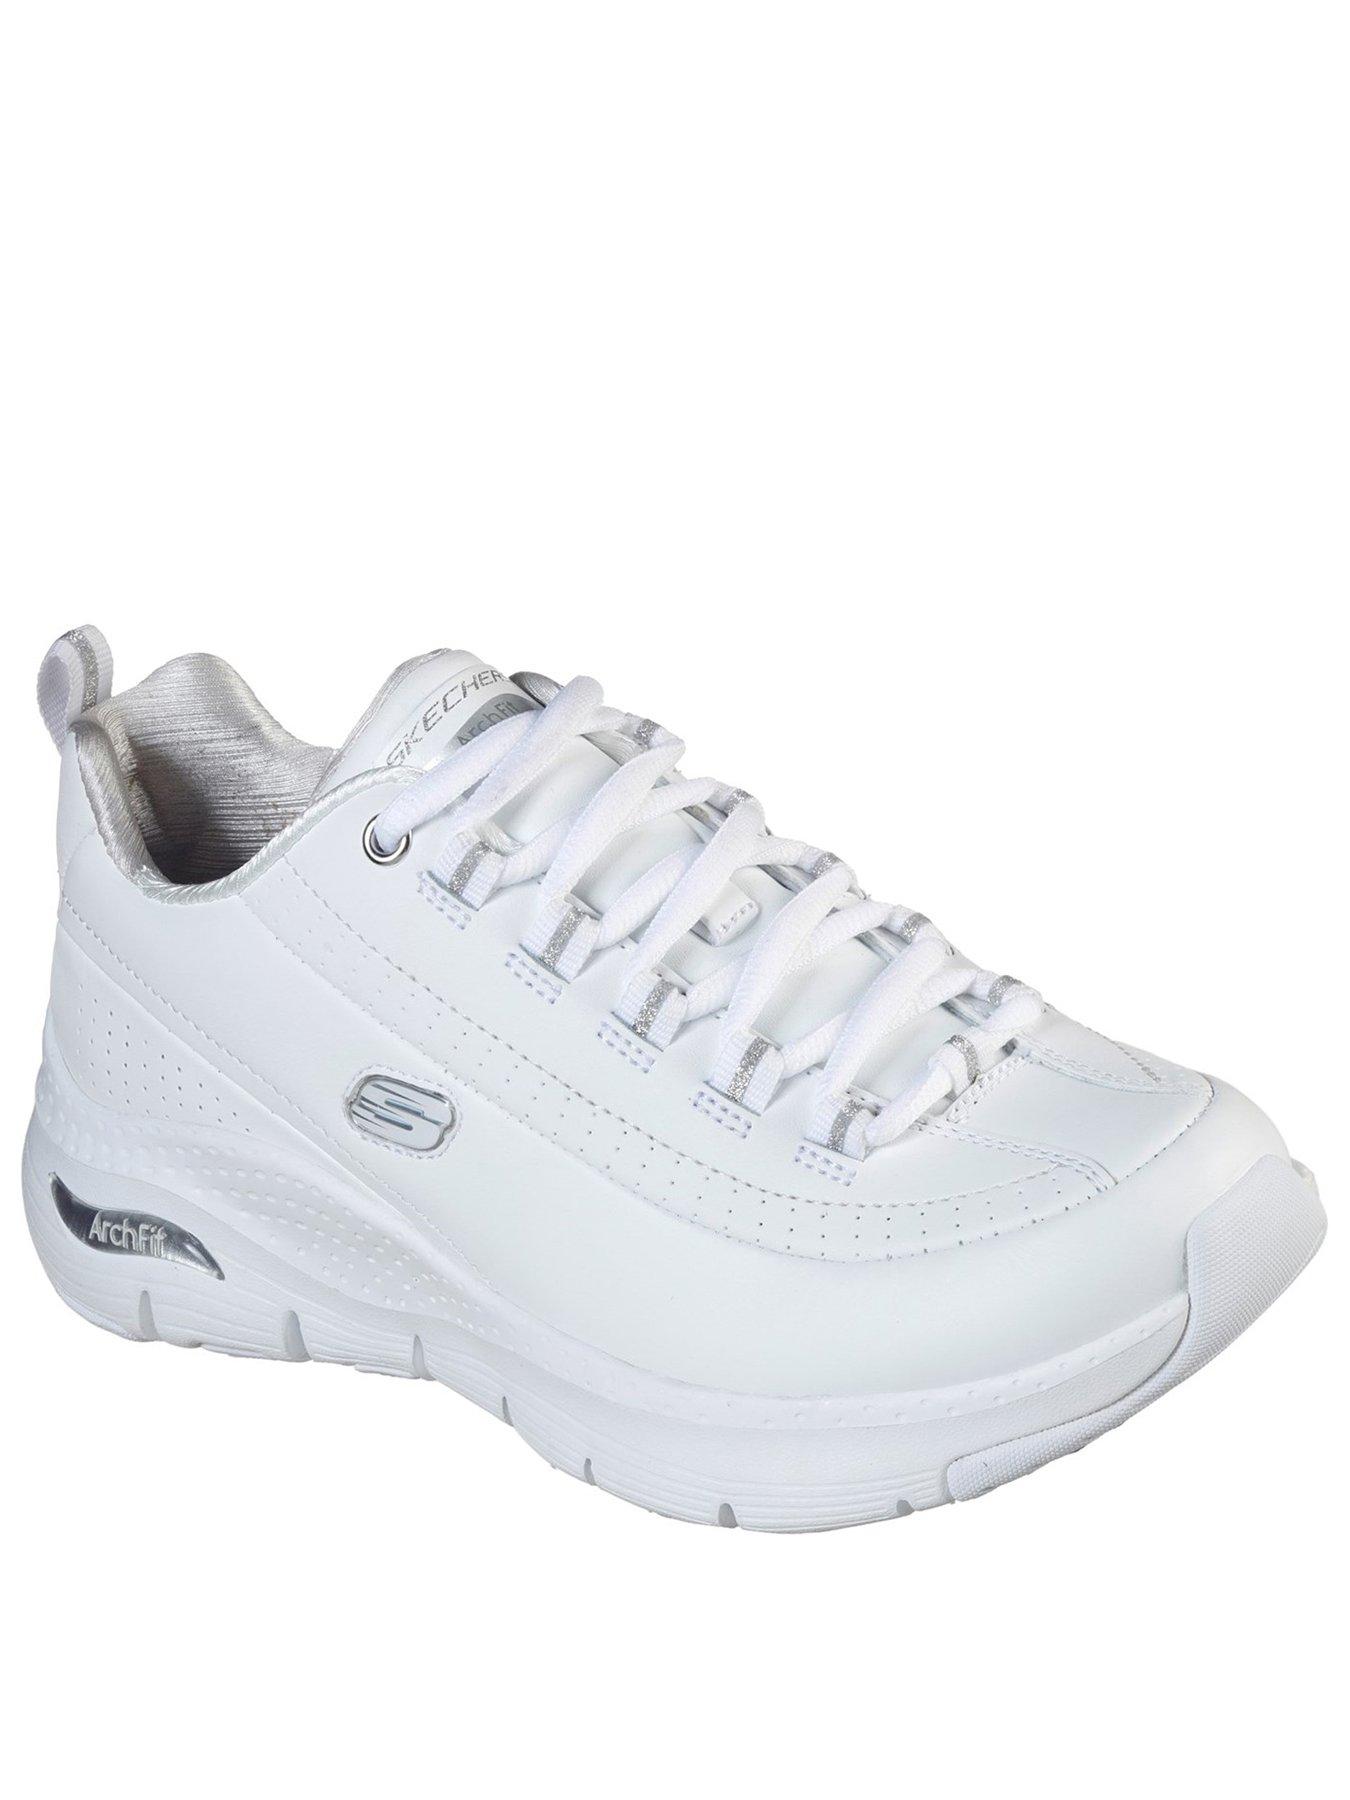 littlewoods womens trainers